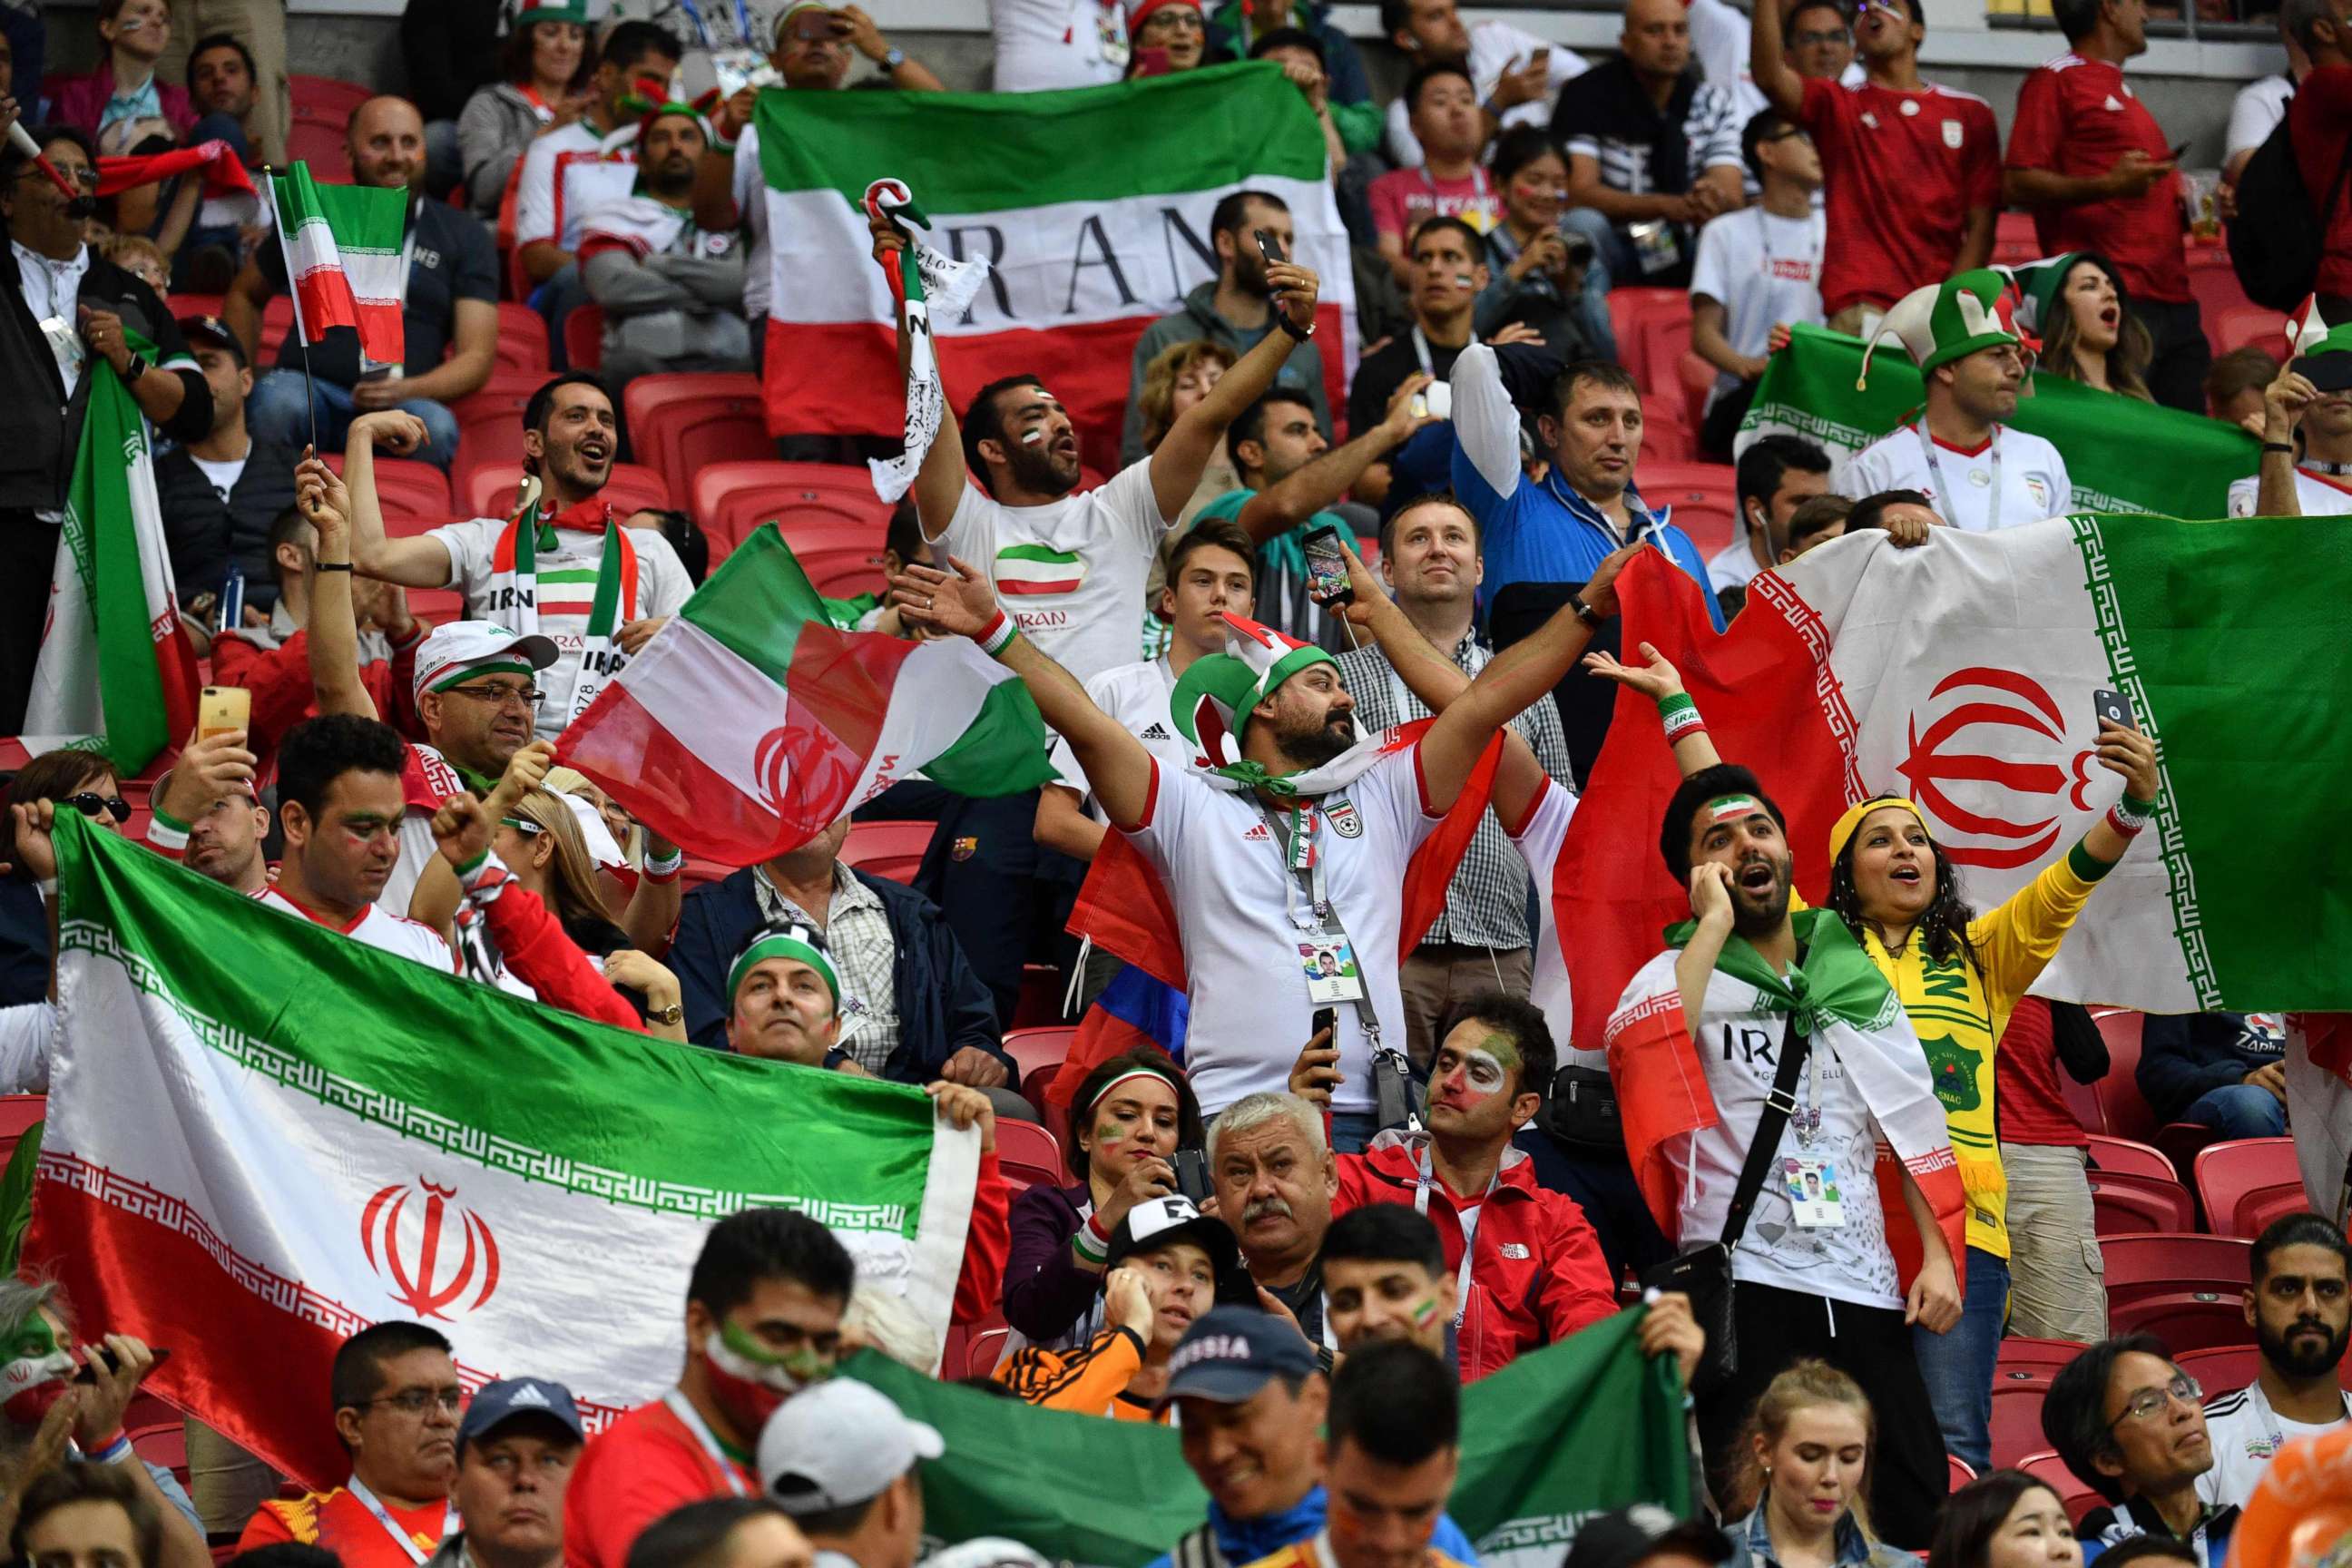 PHOTO: Iran supporters cheer during the Russia 2018 World Cup Group B football match between Iran and Spain at the Kazan Arena in Kazan, June 20, 2018.